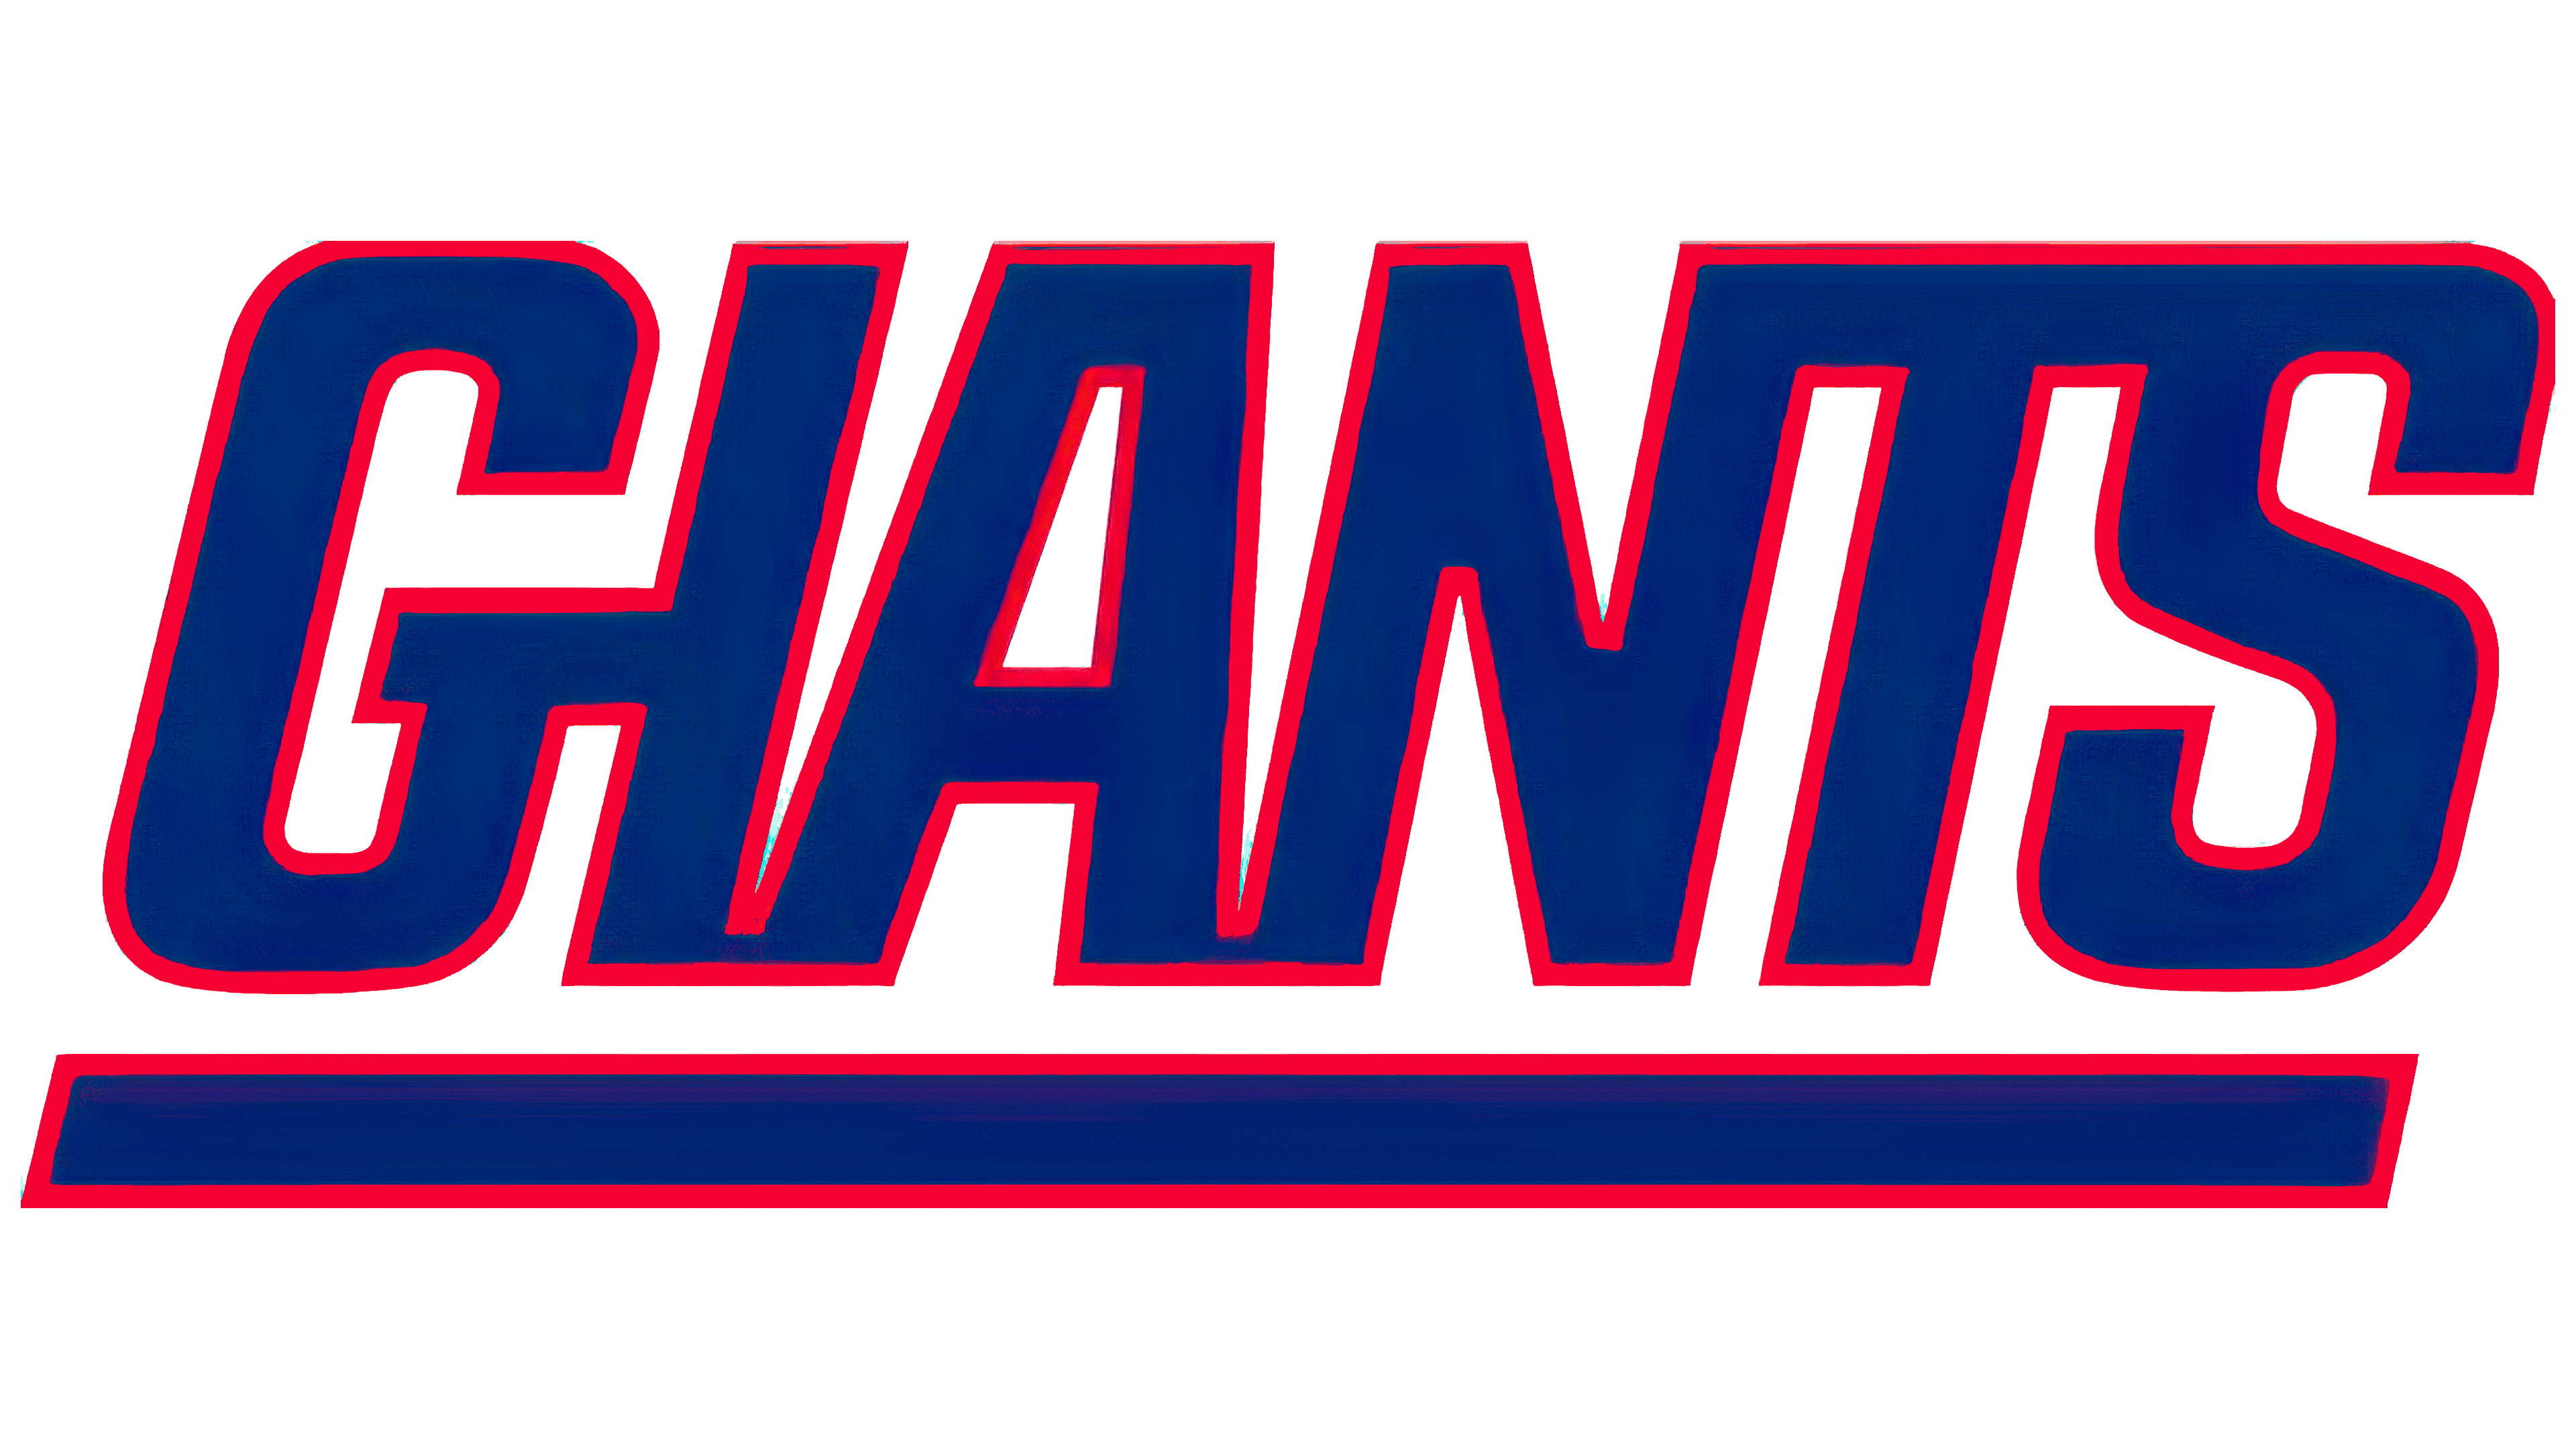 New York Giants Logo and symbol, meaning, history, PNG, brand